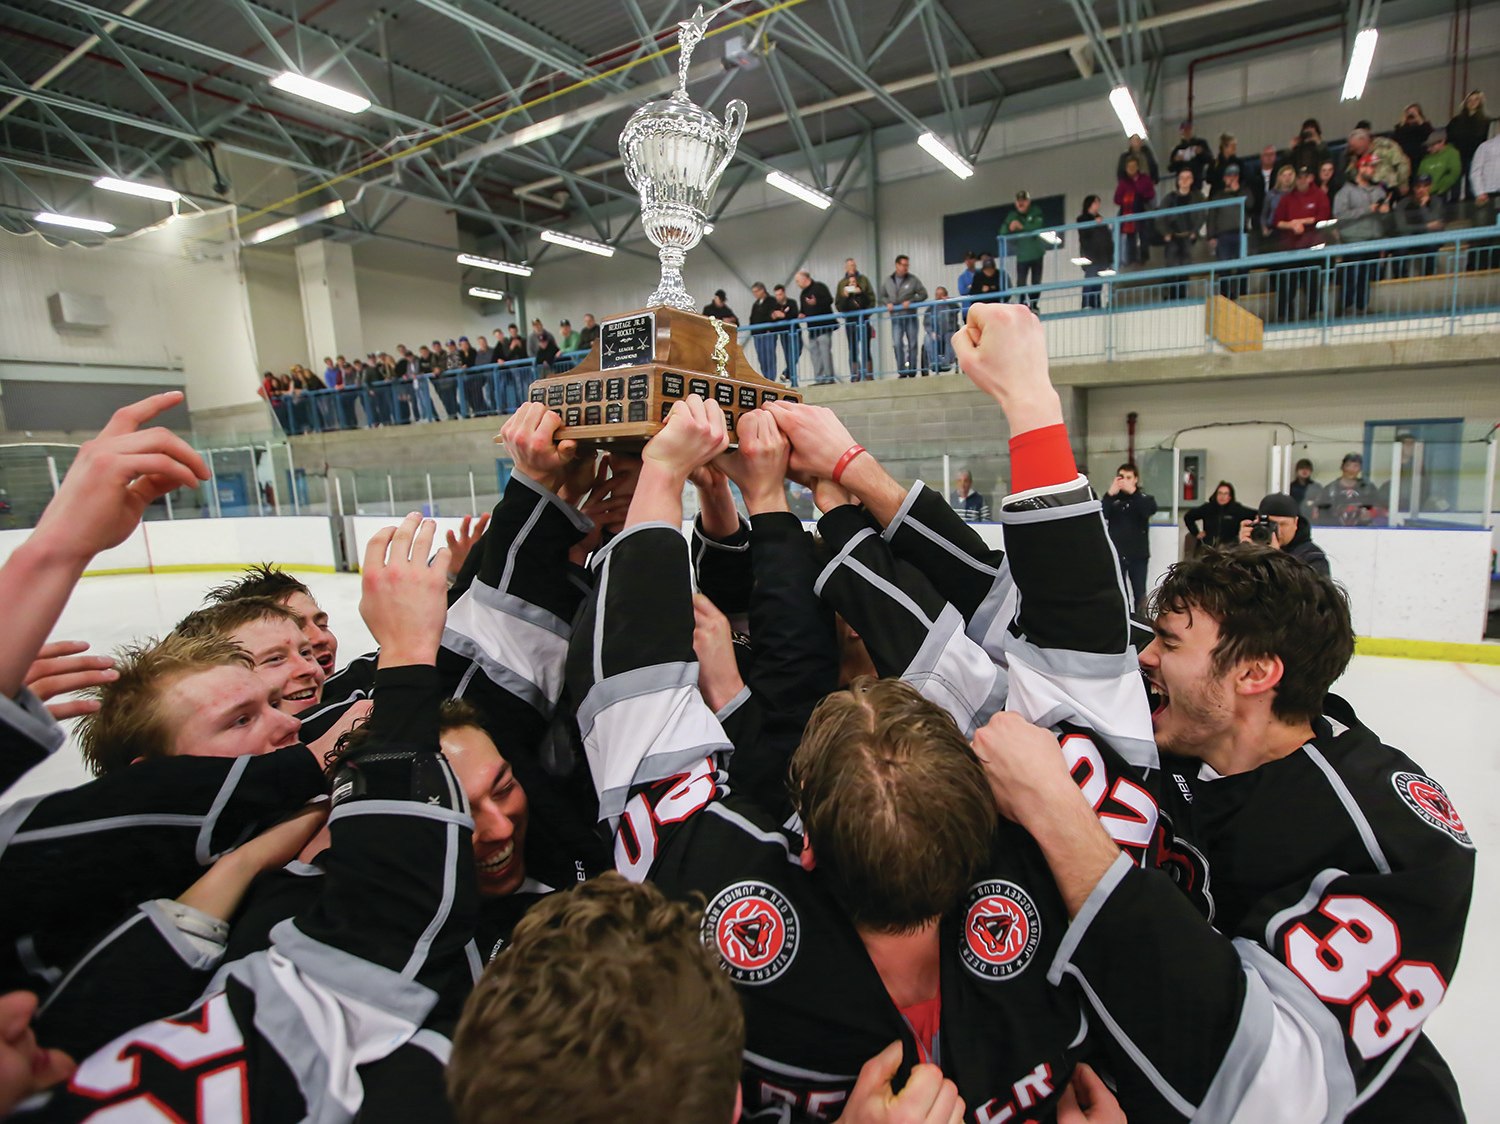 CHAMPS - The Red Deer Vipers celebrated after winning the Heritage Junior B Hockey League championship with a 4-3 triple overtime victory over the Cochrane Generals during game four of the HJHL League final at the Collicutt Centre Thursday night.